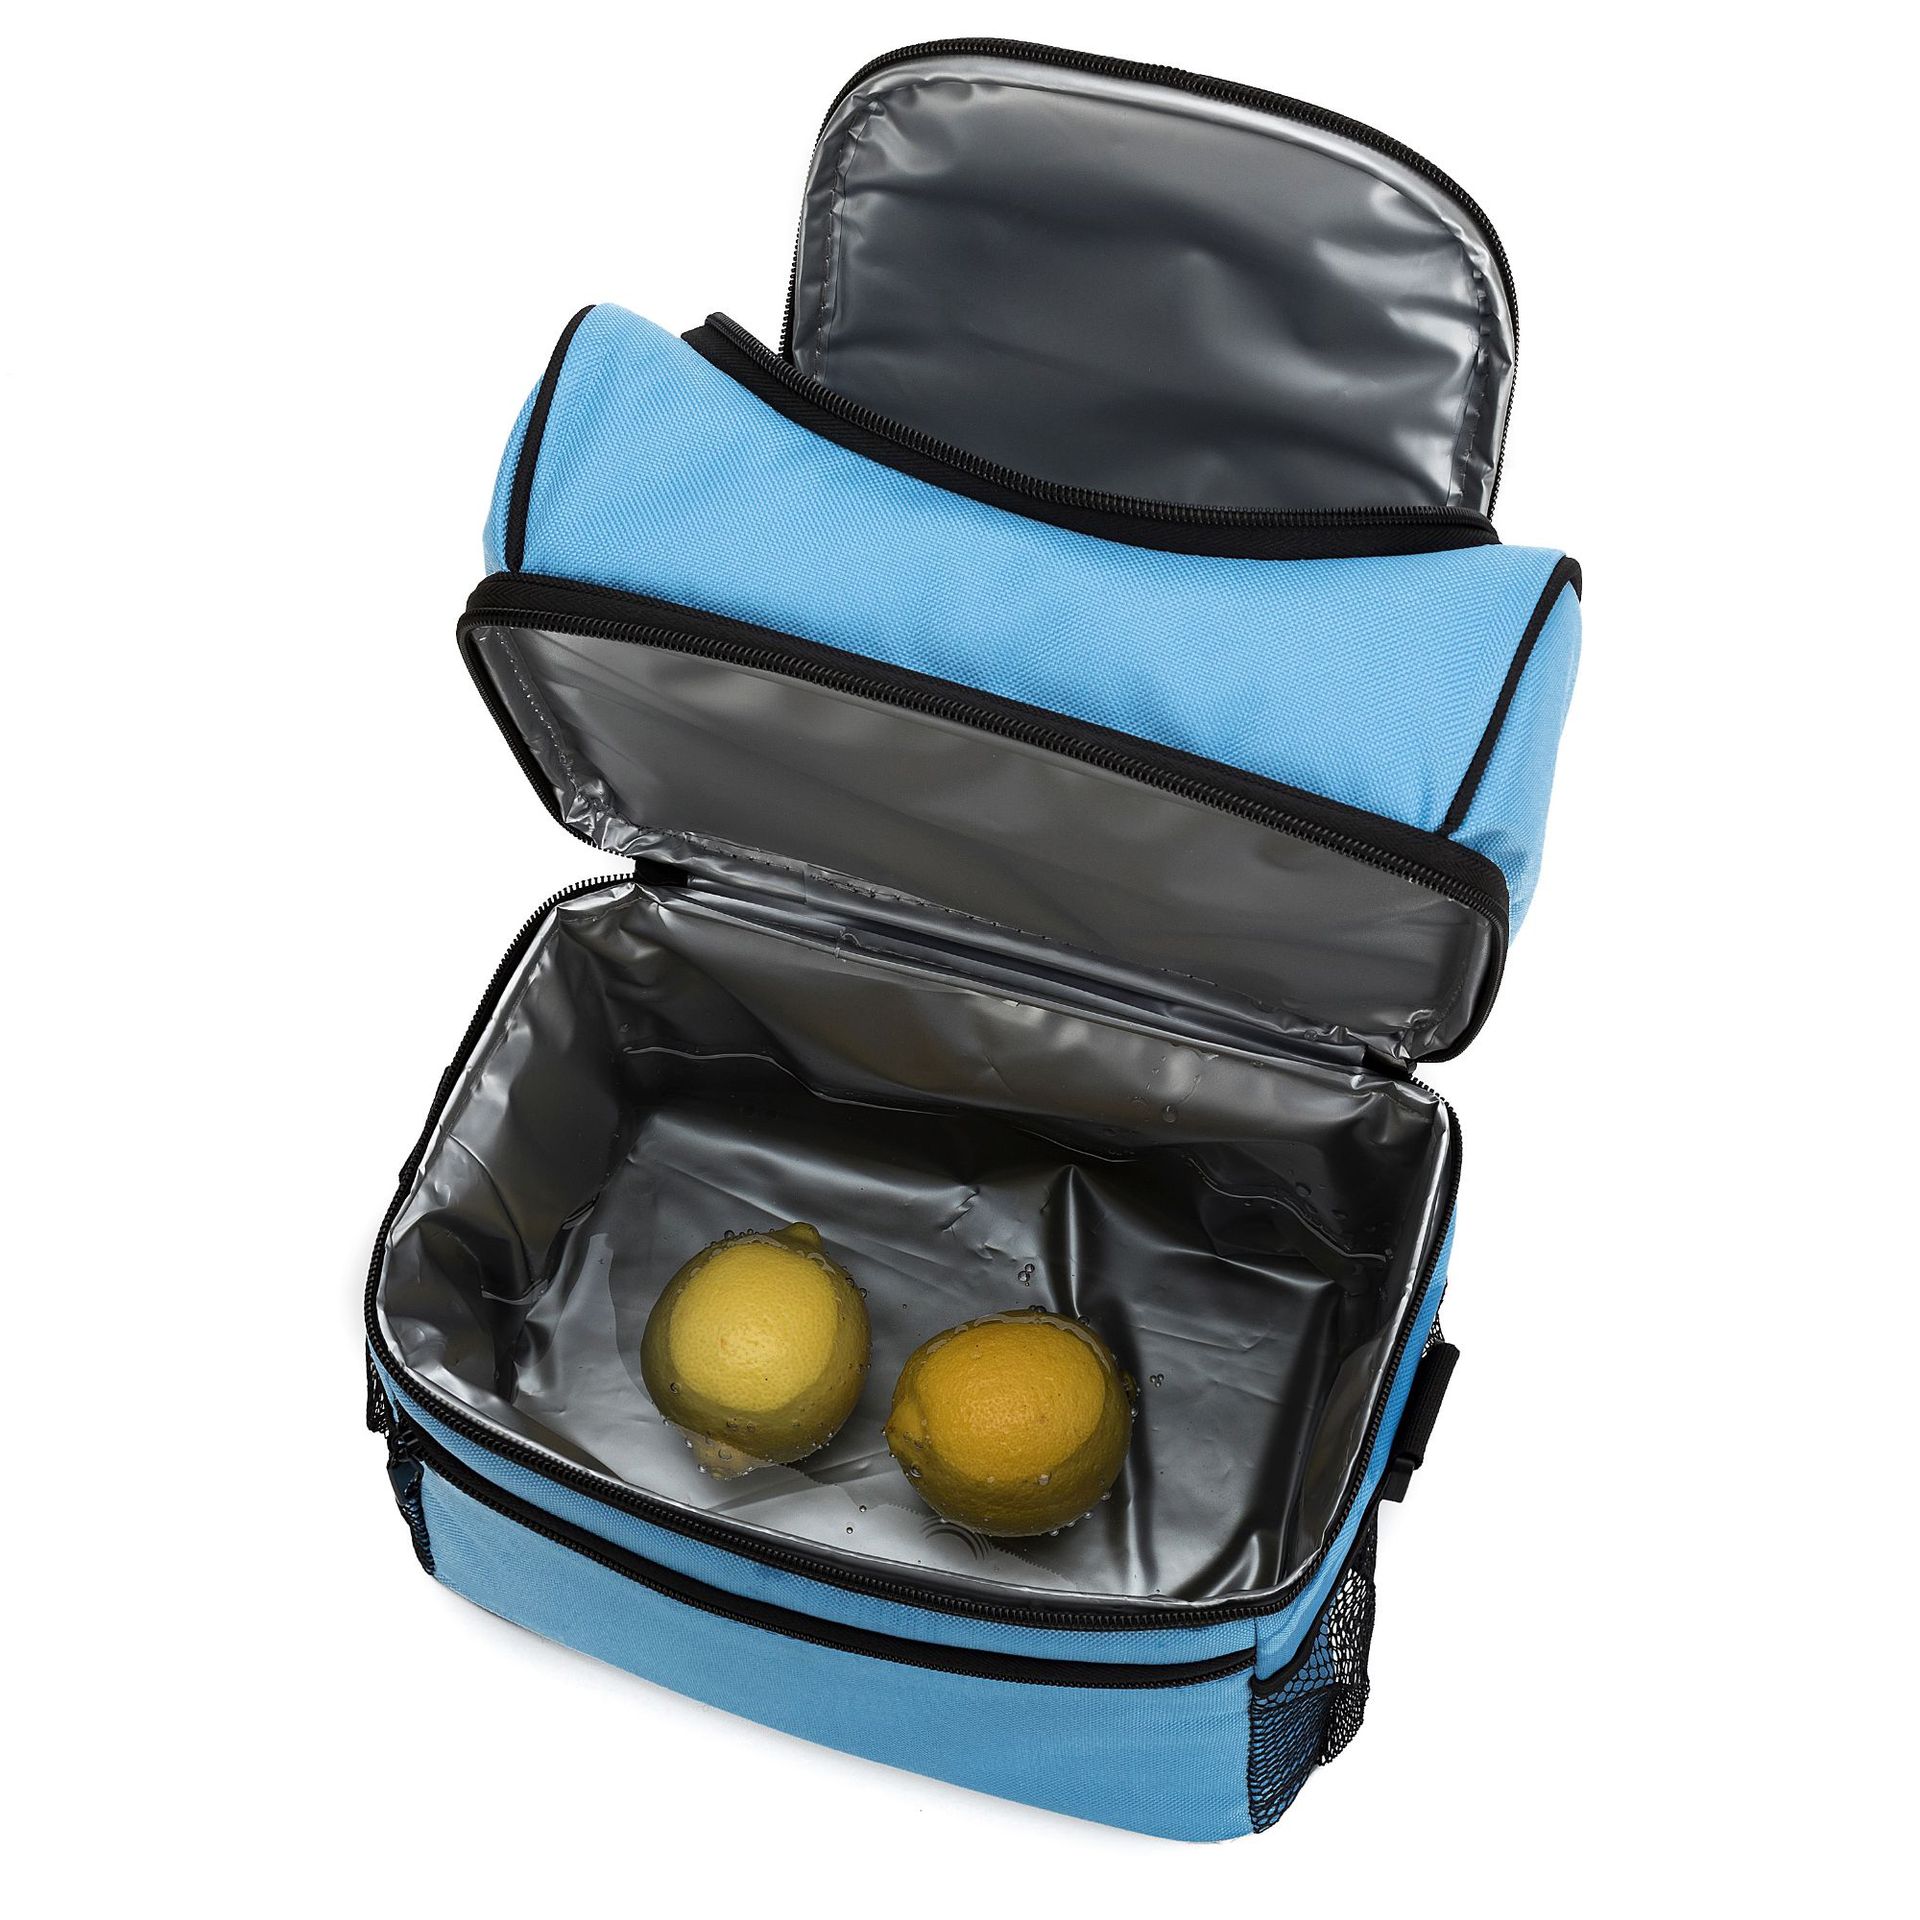 Large capacity Insulated Lunch Bag